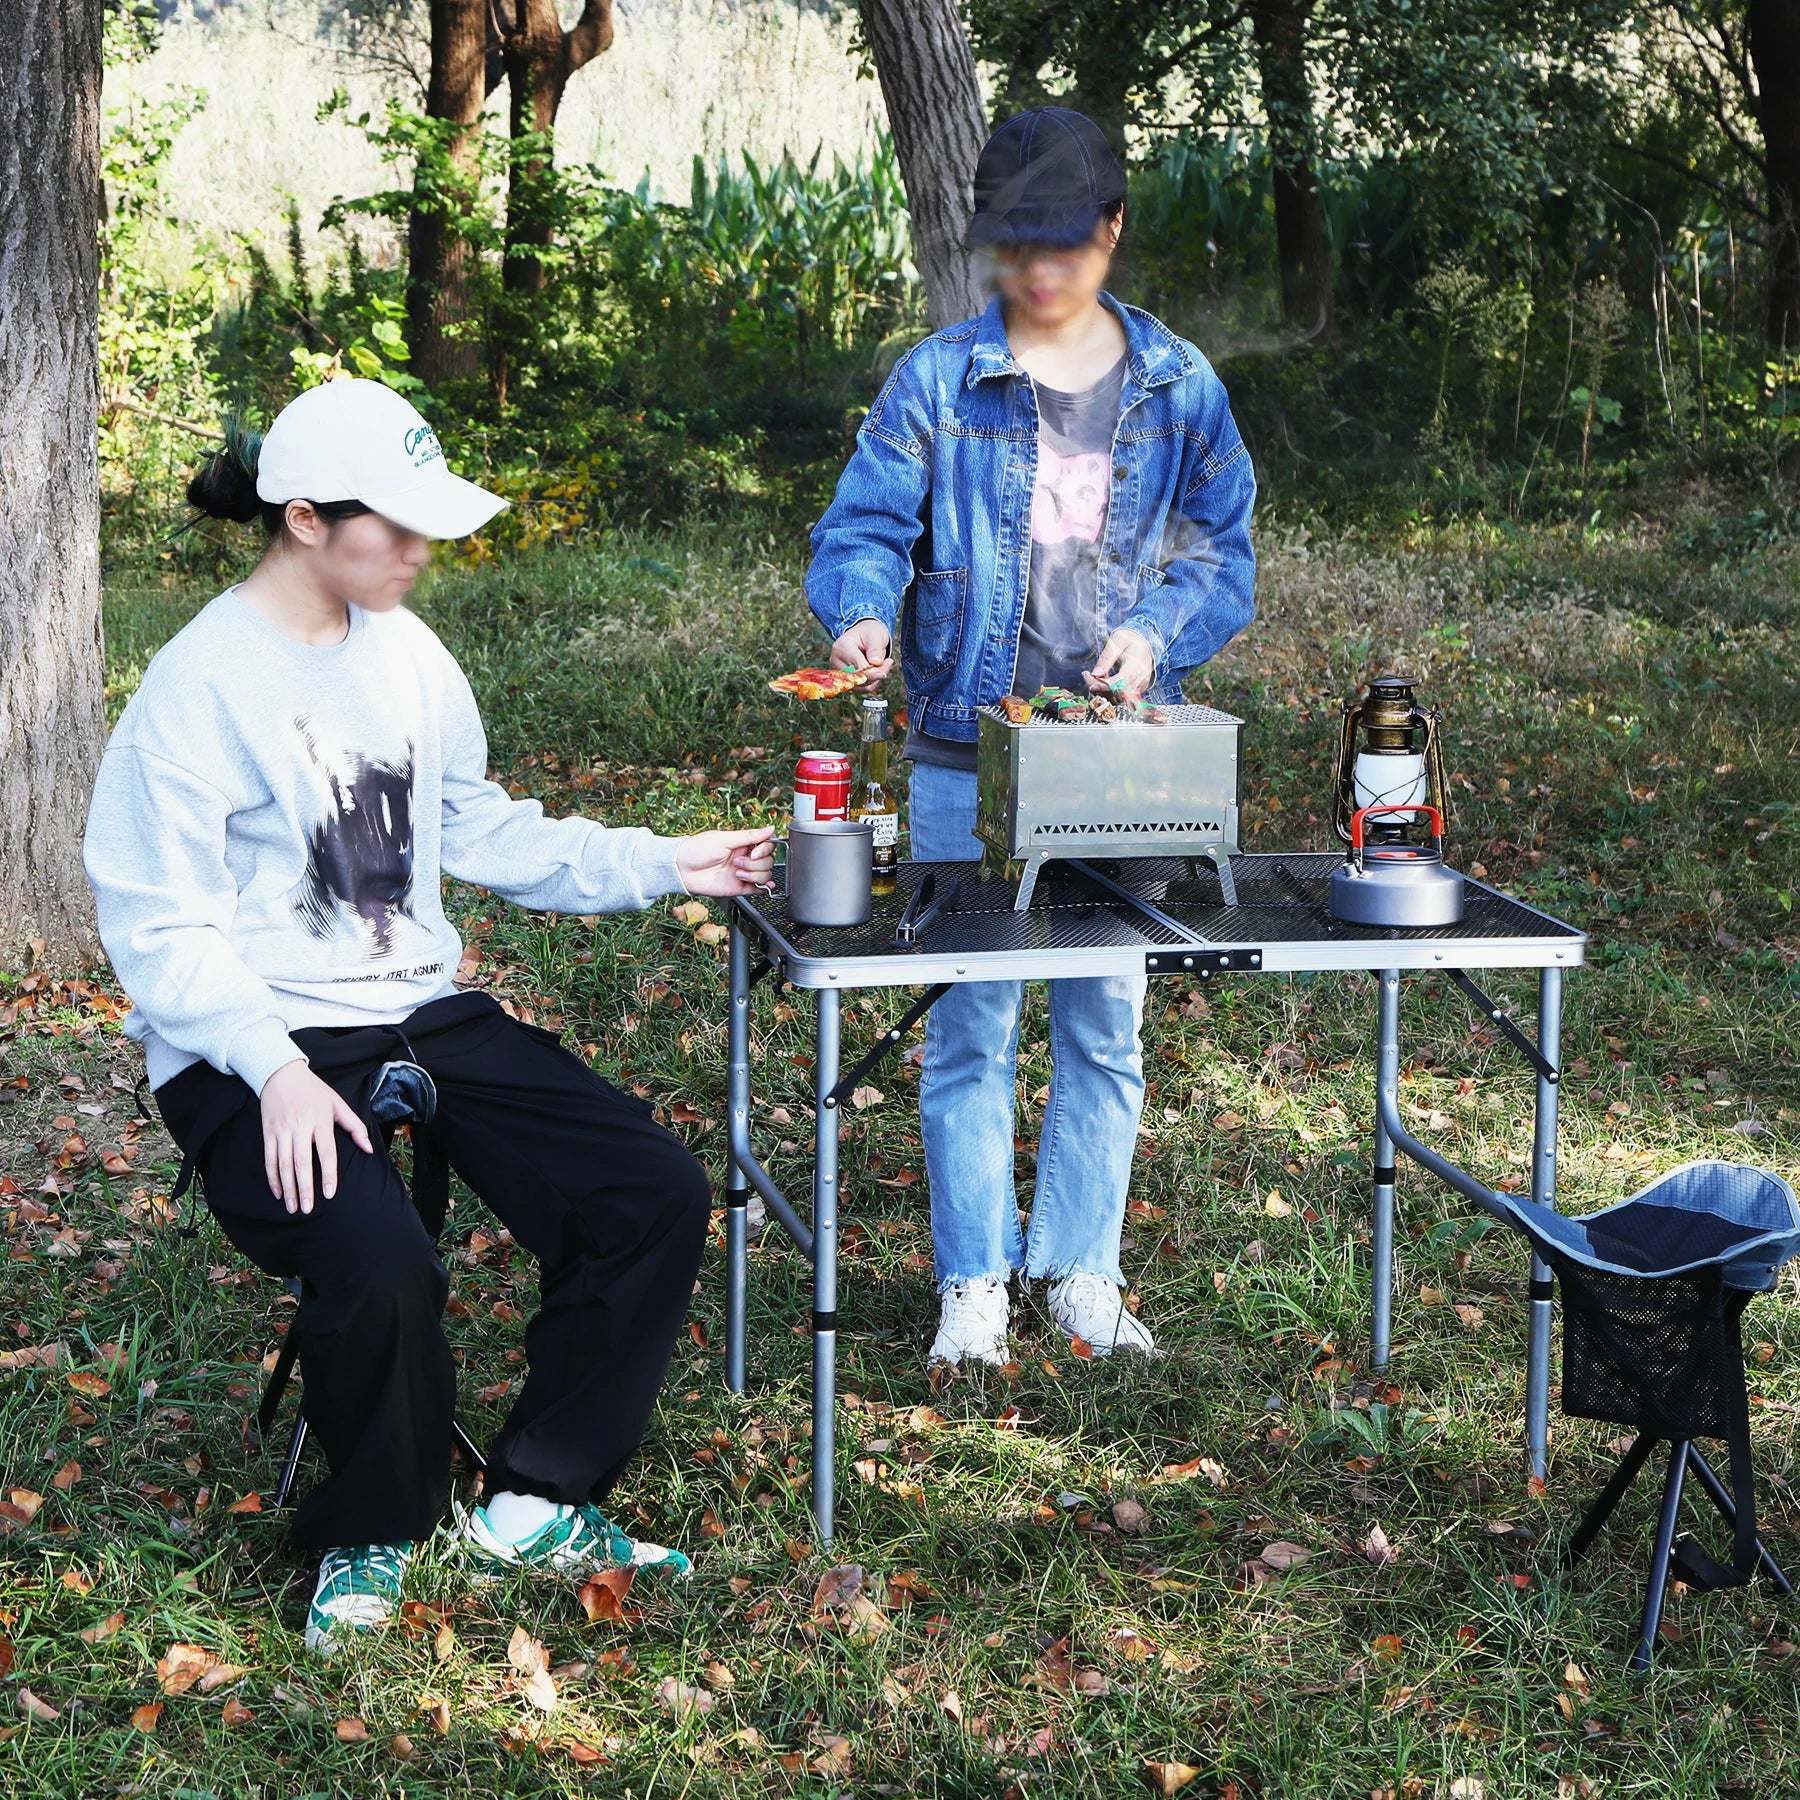 REDCAMP Folding Portable Grill Table for Outside